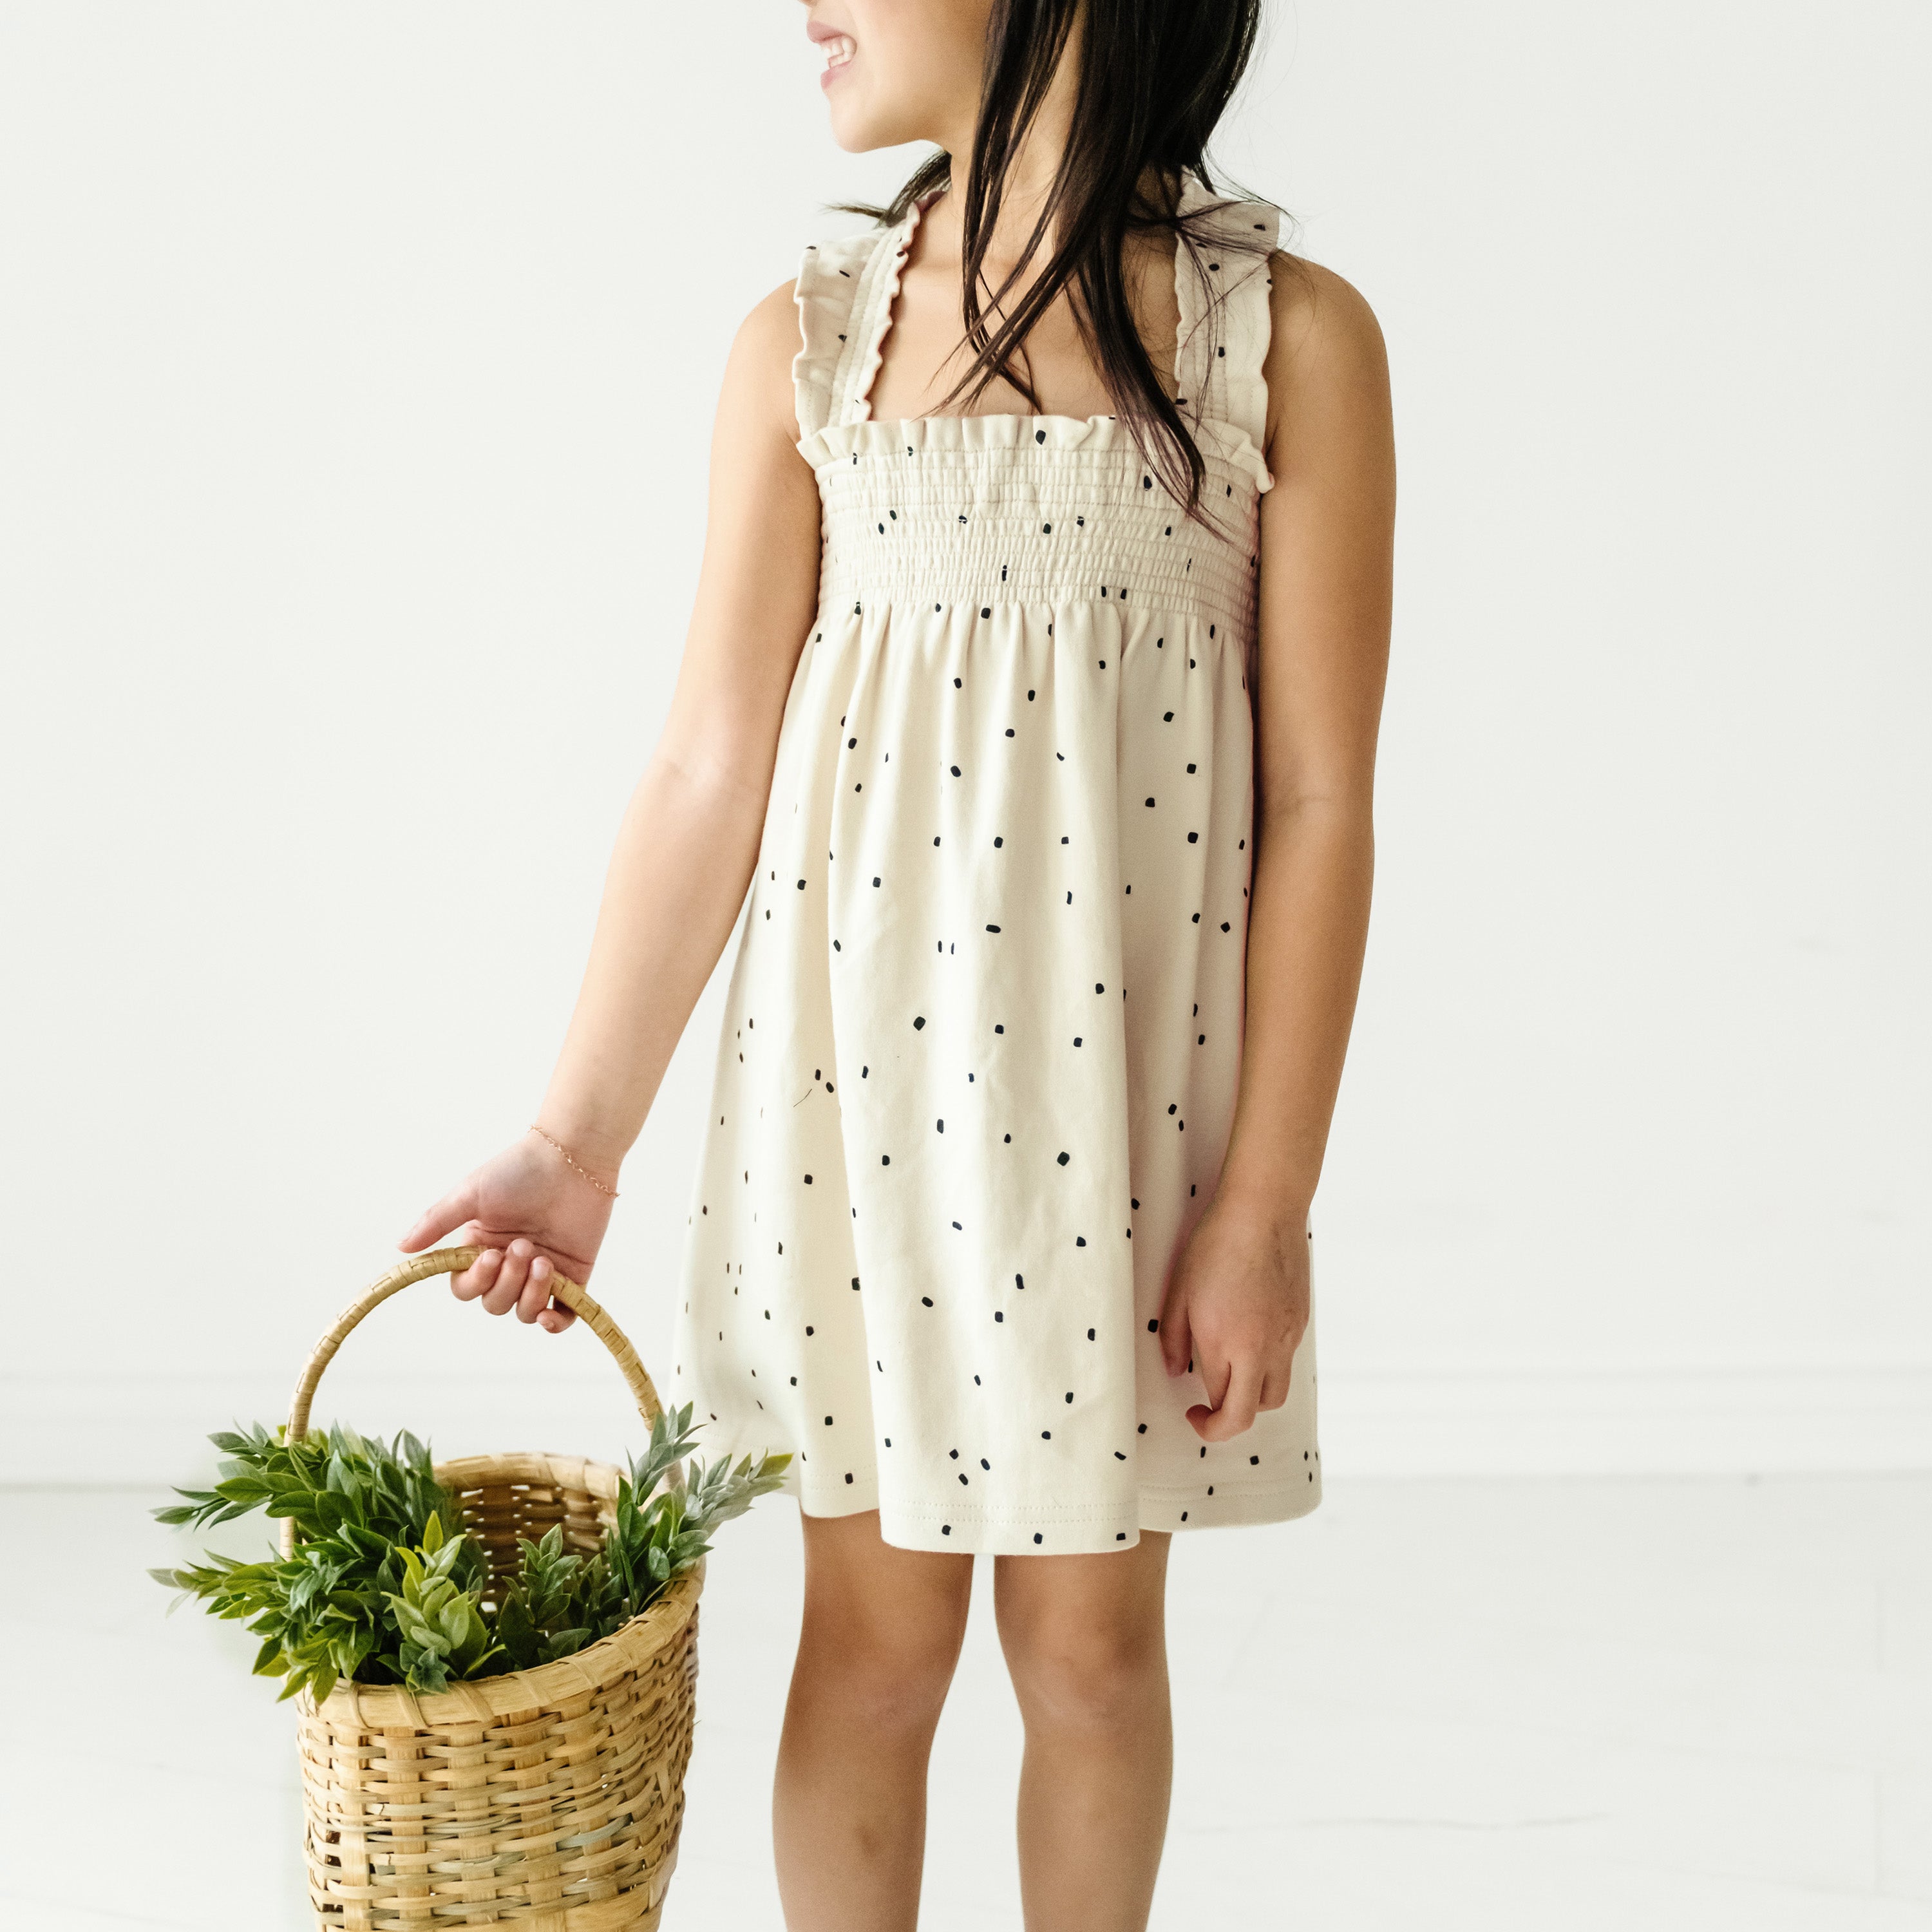 A young girl in a Makemake Organics Organic Smocked Dress in Pixie Dots holds a wicker basket filled with green plants. She is facing away from the camera, showing only a side profile of her toddler-sized frame.